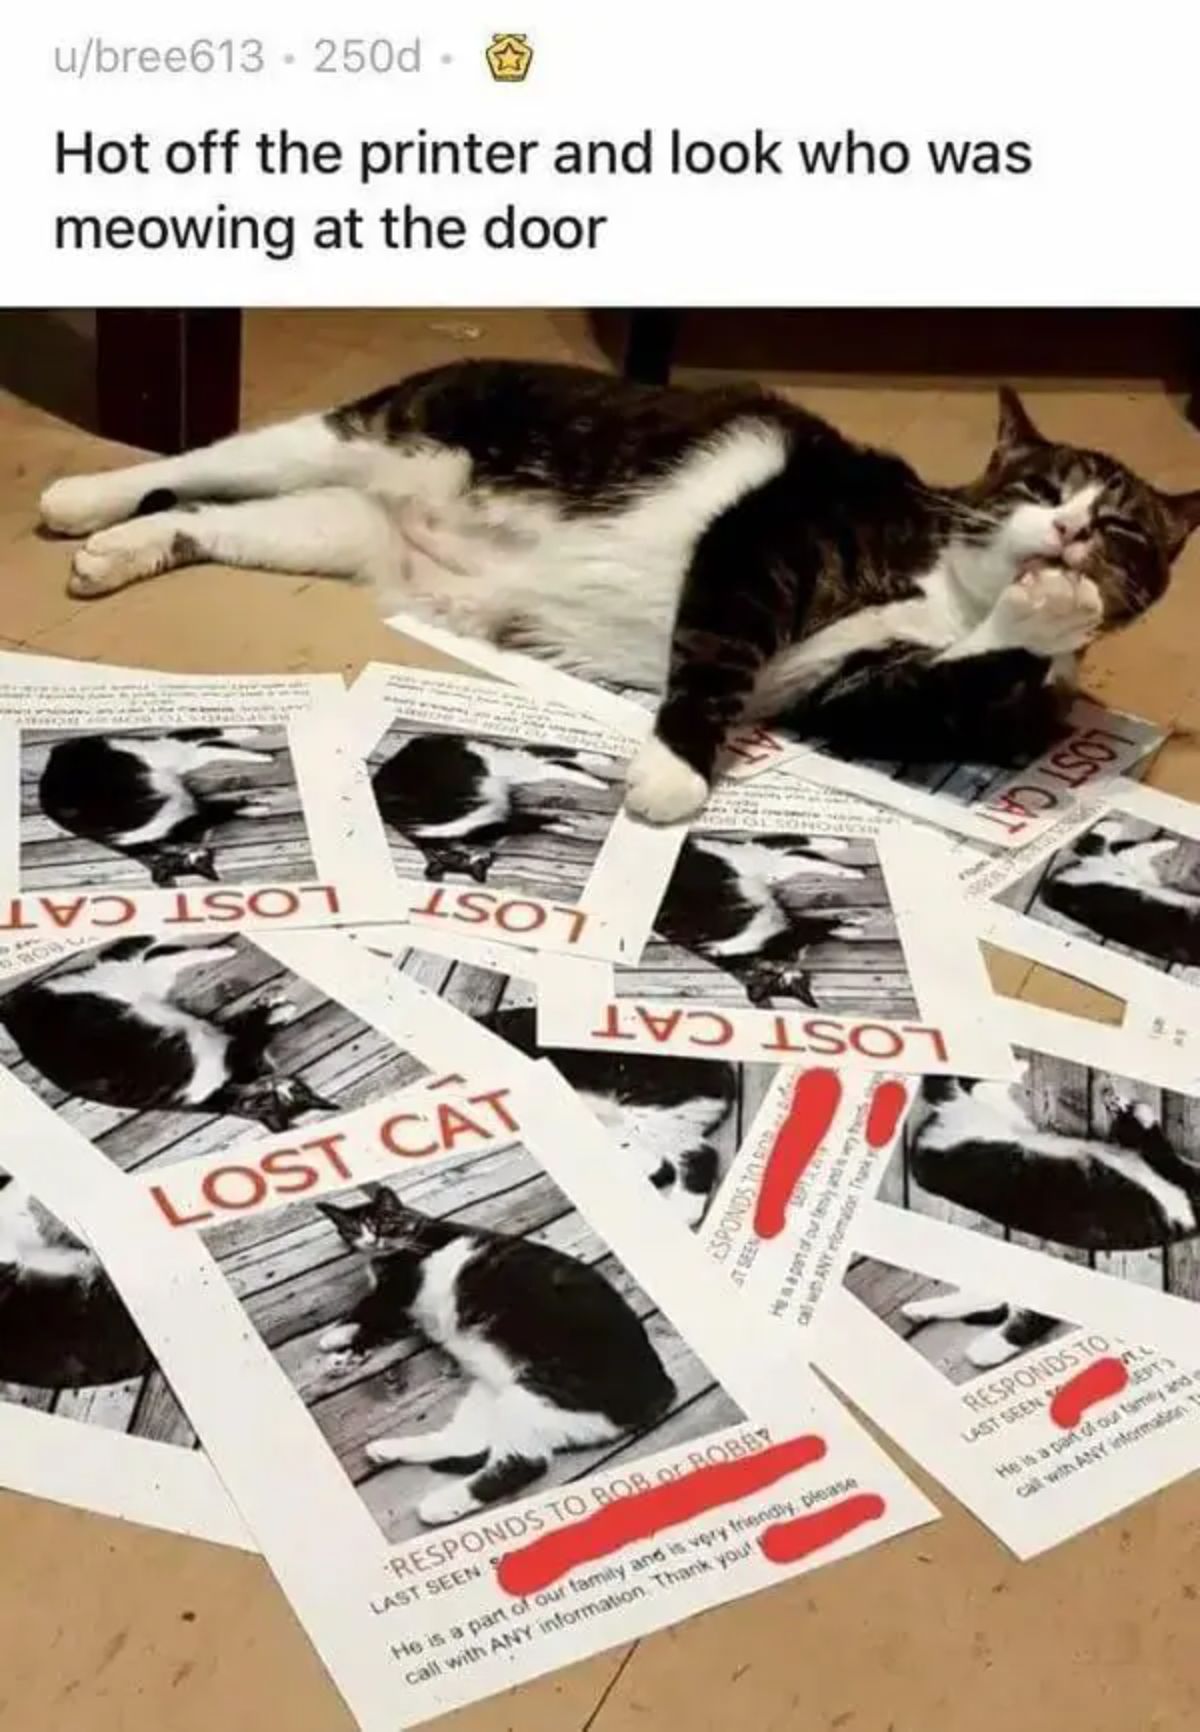 black and white cat laying on a pile of lost cat posters on the floor